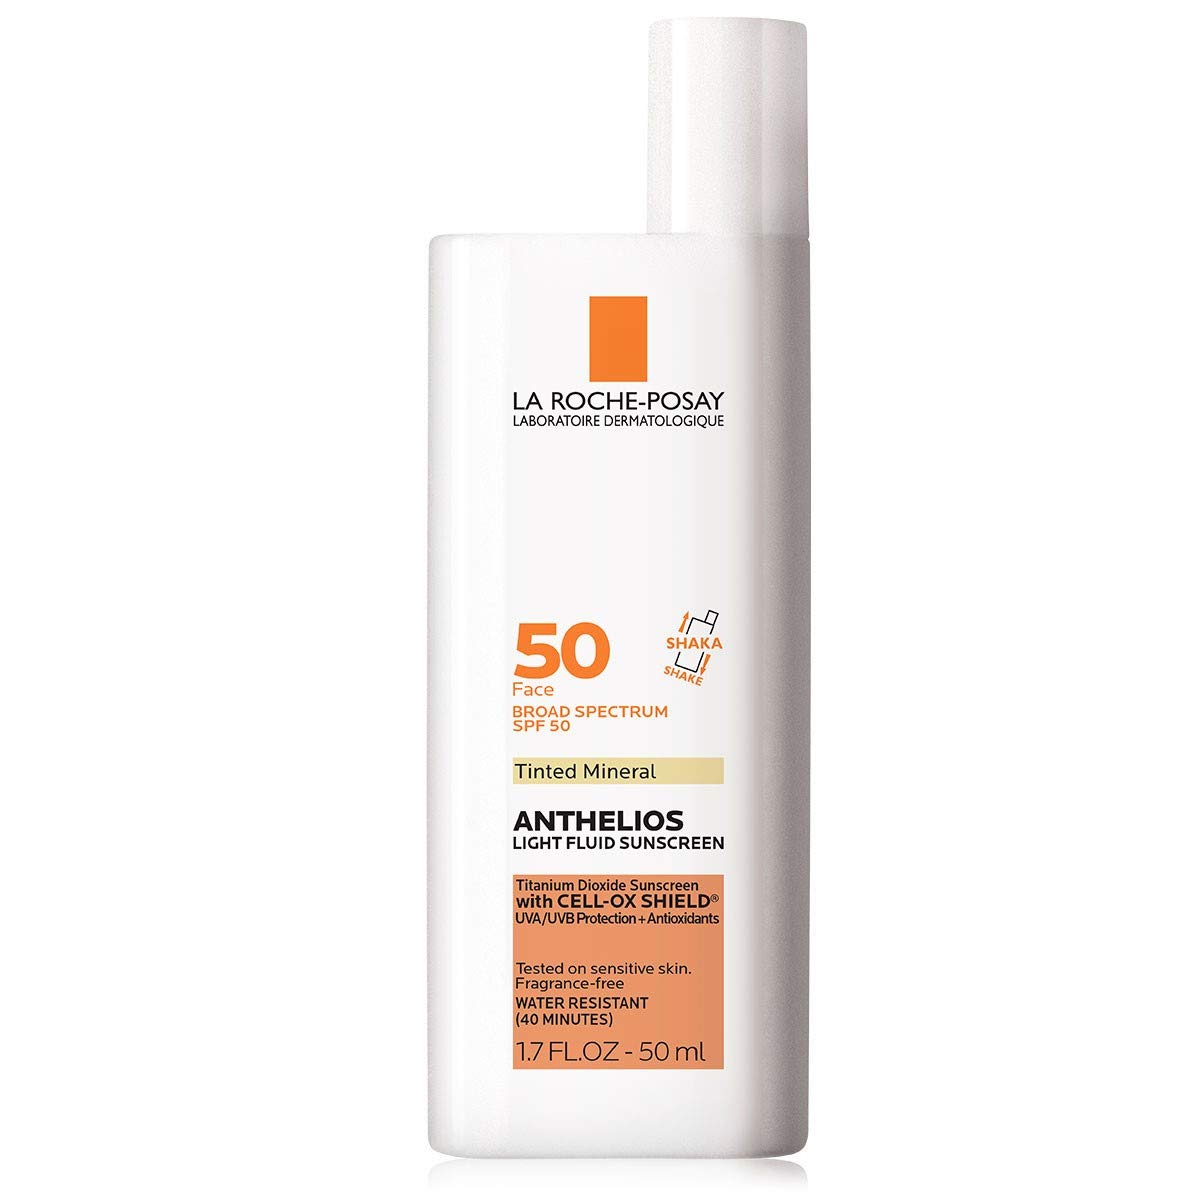 La Roche Posay Anthelios Ultra-Light Tinted Mineral Sunscreen SPF 50, 50ml